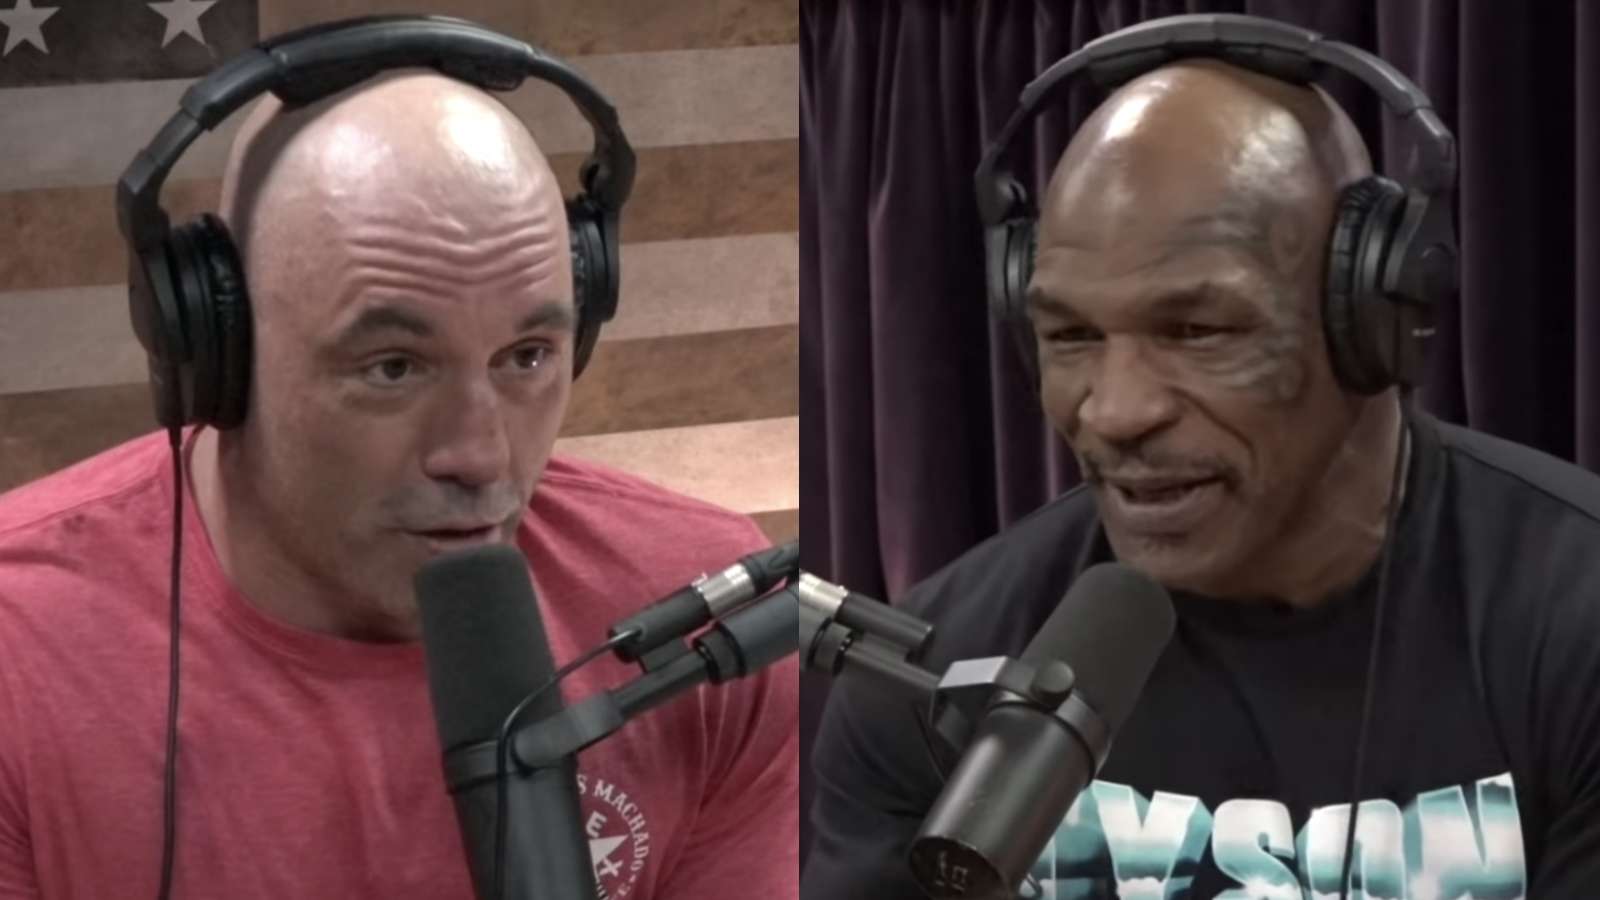 Joe Rogan and Mike Tyson on JRE podcast